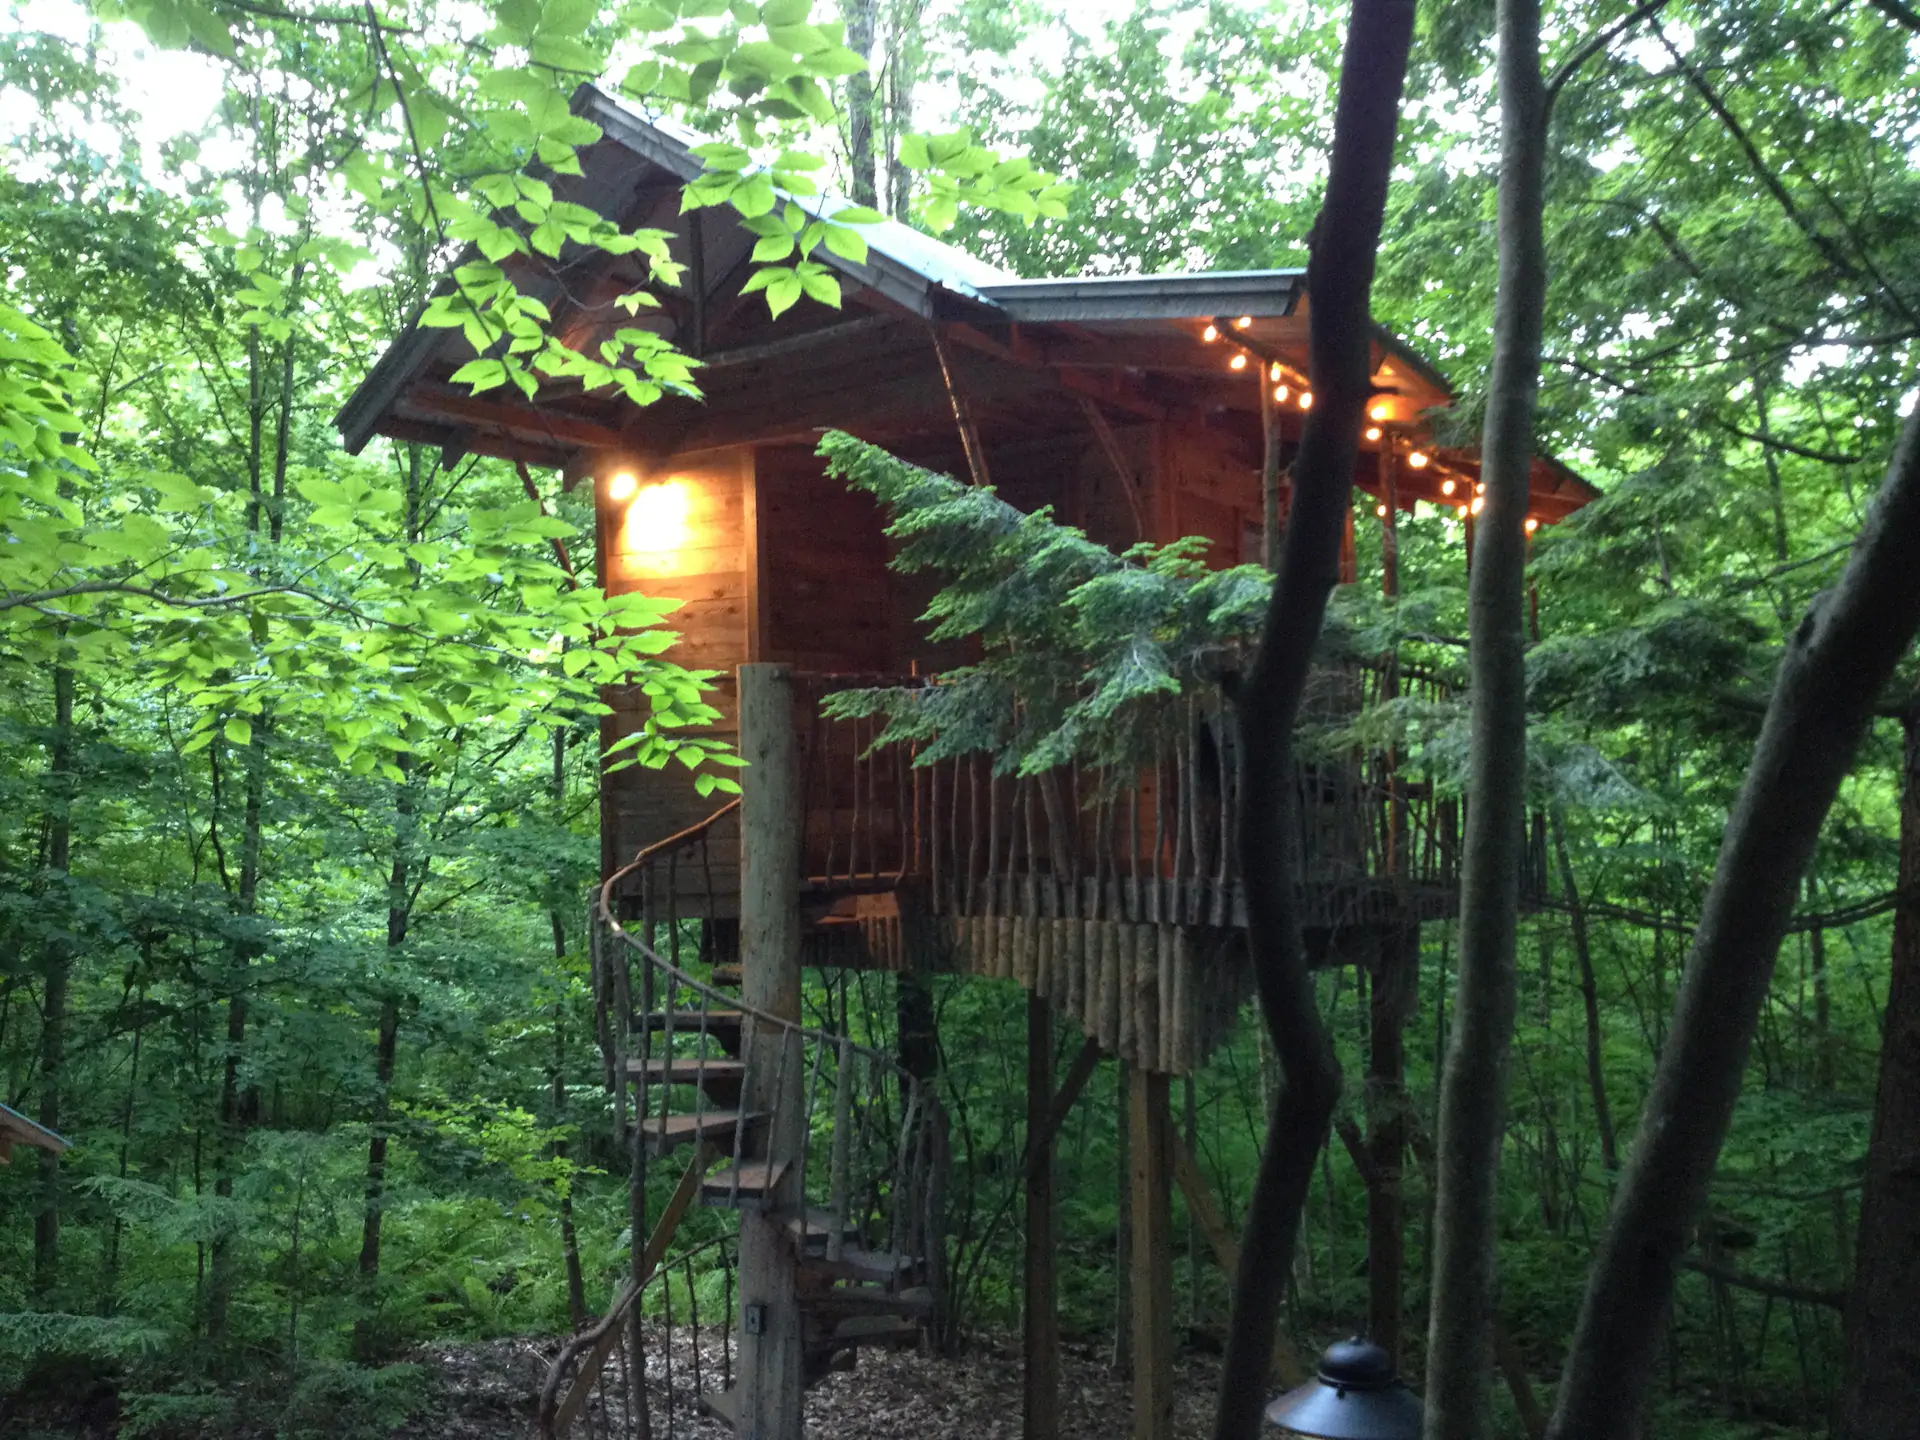 Photo of another tree house where you can stay during your New York road trip.